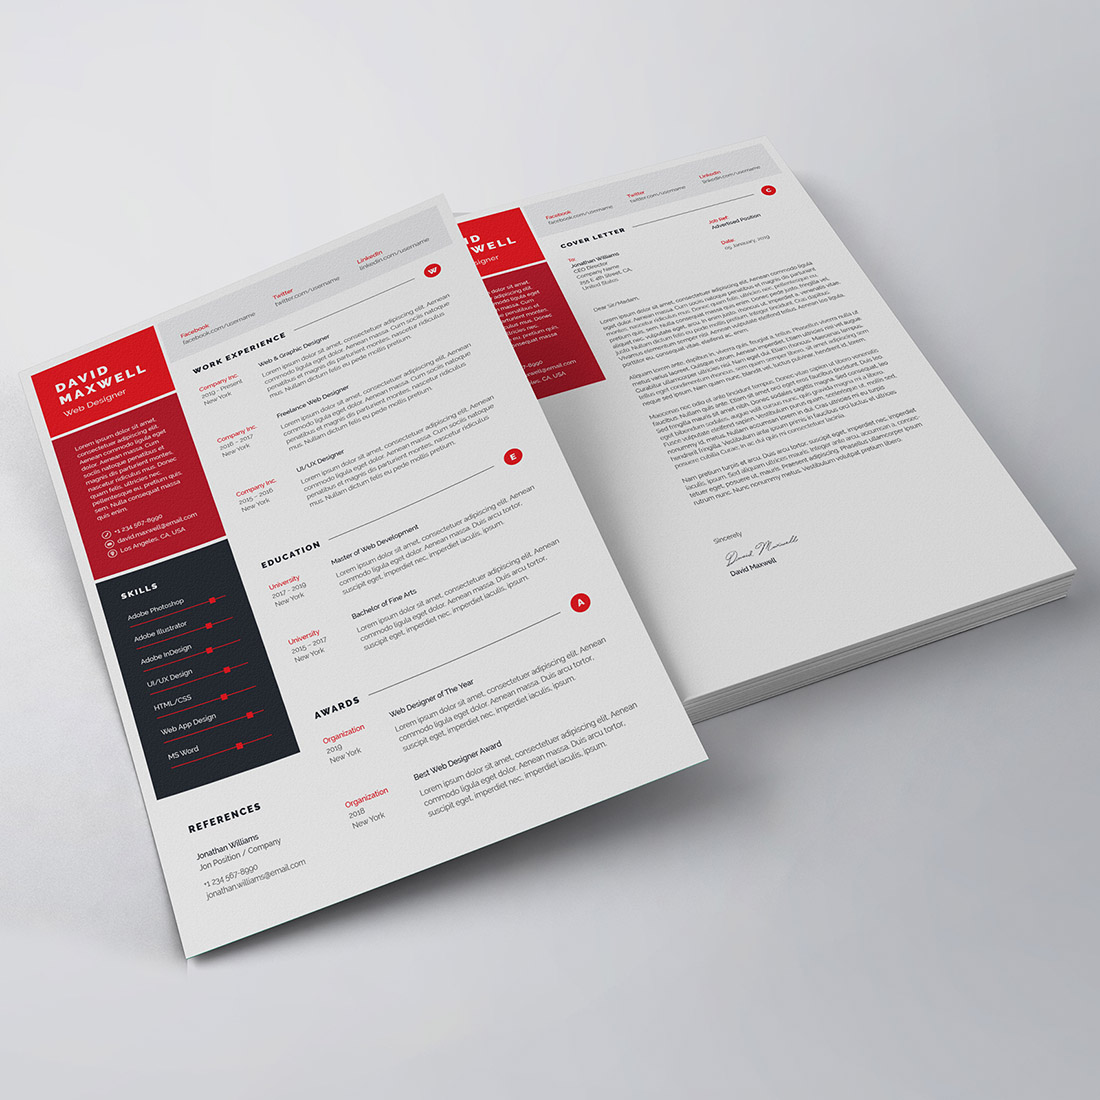 Red and black resume template on a white background.